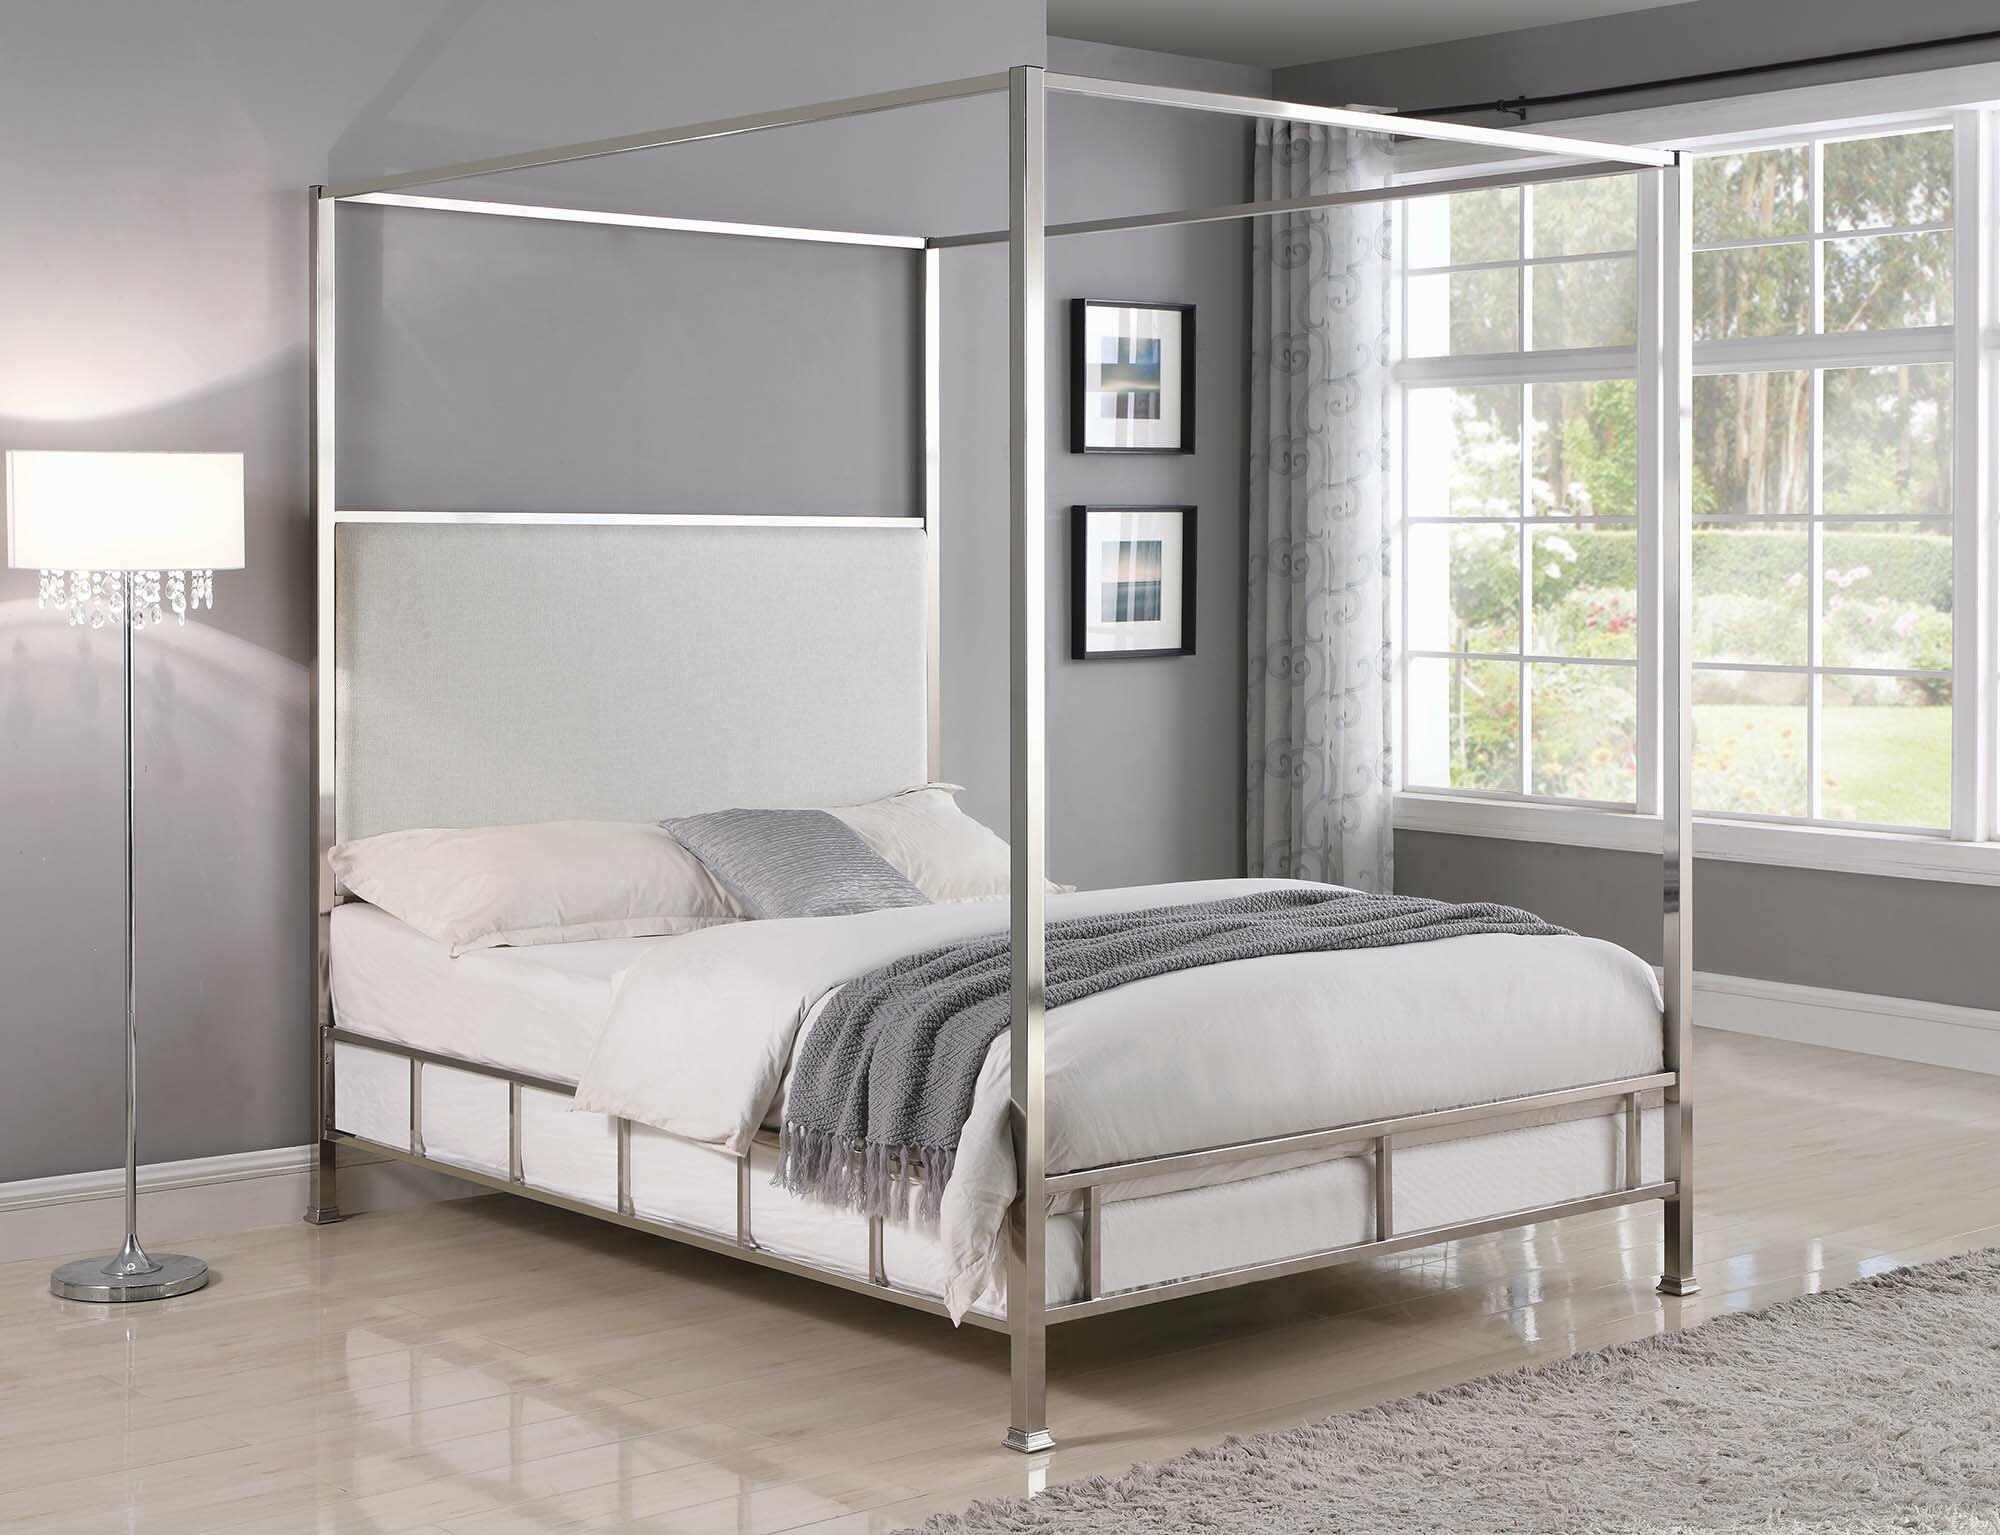 Everly Quinn Brimfield Upholstered Canopy Bed Wayfair